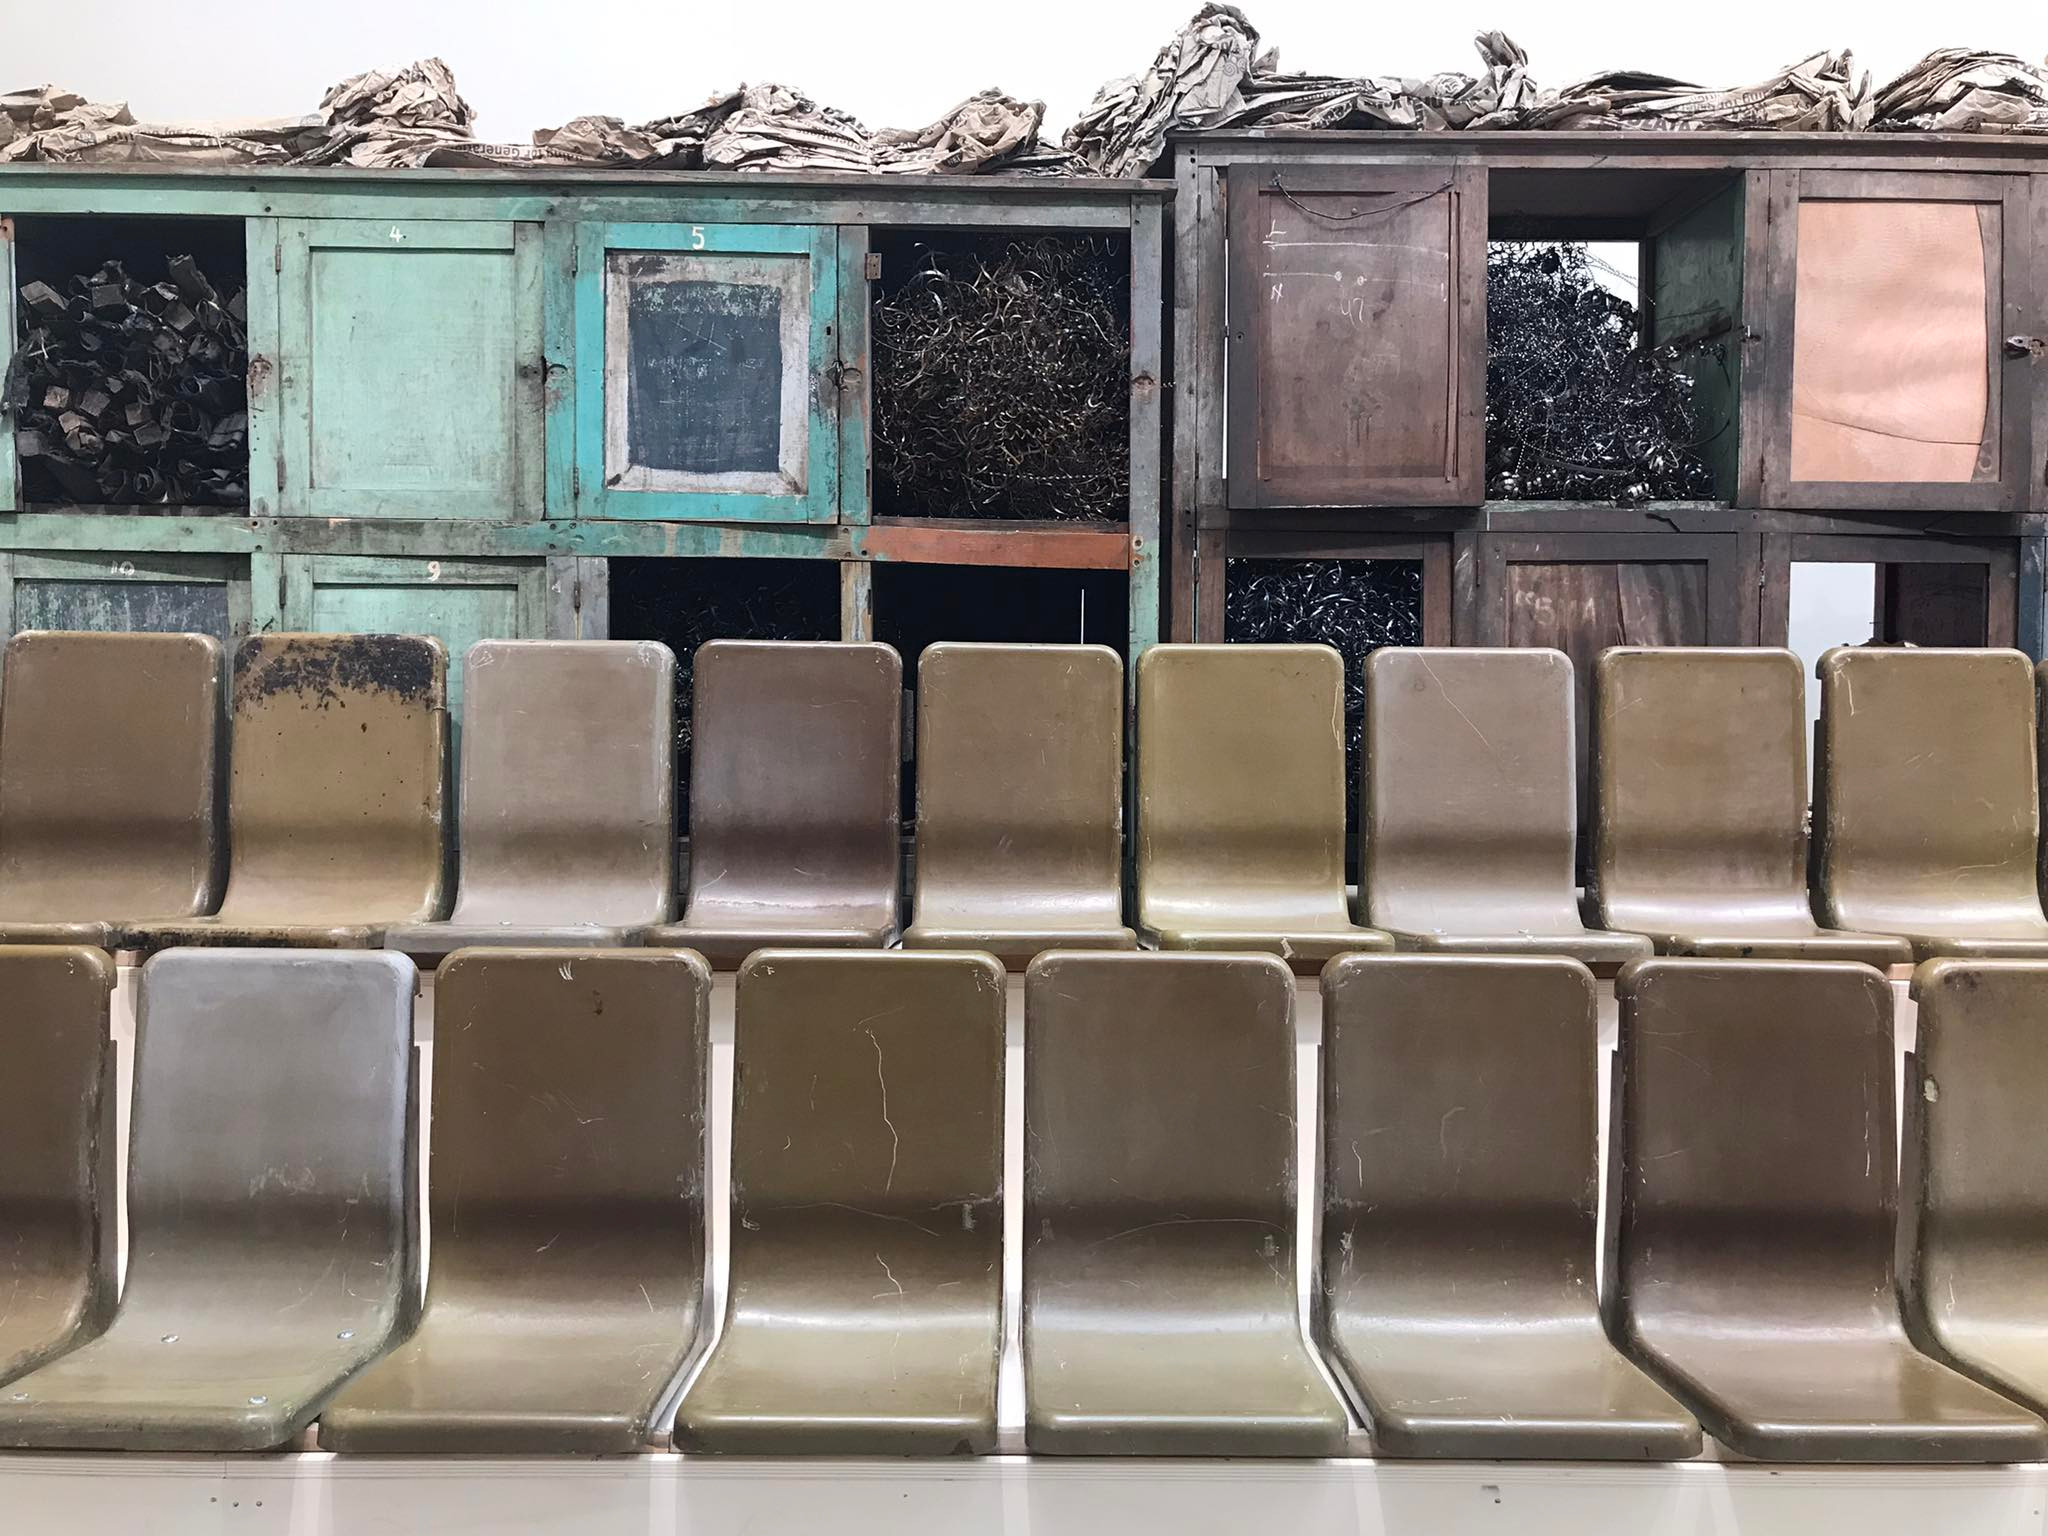 A part of the installation "Parliament of Ghosts," by Ibrahim Mahama, exposed at Venice Biennale of Architecture, 2023. From the accompanying text: "The work originally addressed historical ideas around materials and issues of colonial exploitation […]. The space was inspired by both the residue of the Gold Coast Railway infrastructure and abandoned modernist buildings from the 1960s Nkrumah’s Volini in Tamale (Ghana). How do we restore memories to which access was denied? How do we excavate the past in order to build new futures?" Photo: Olga Bubich ©